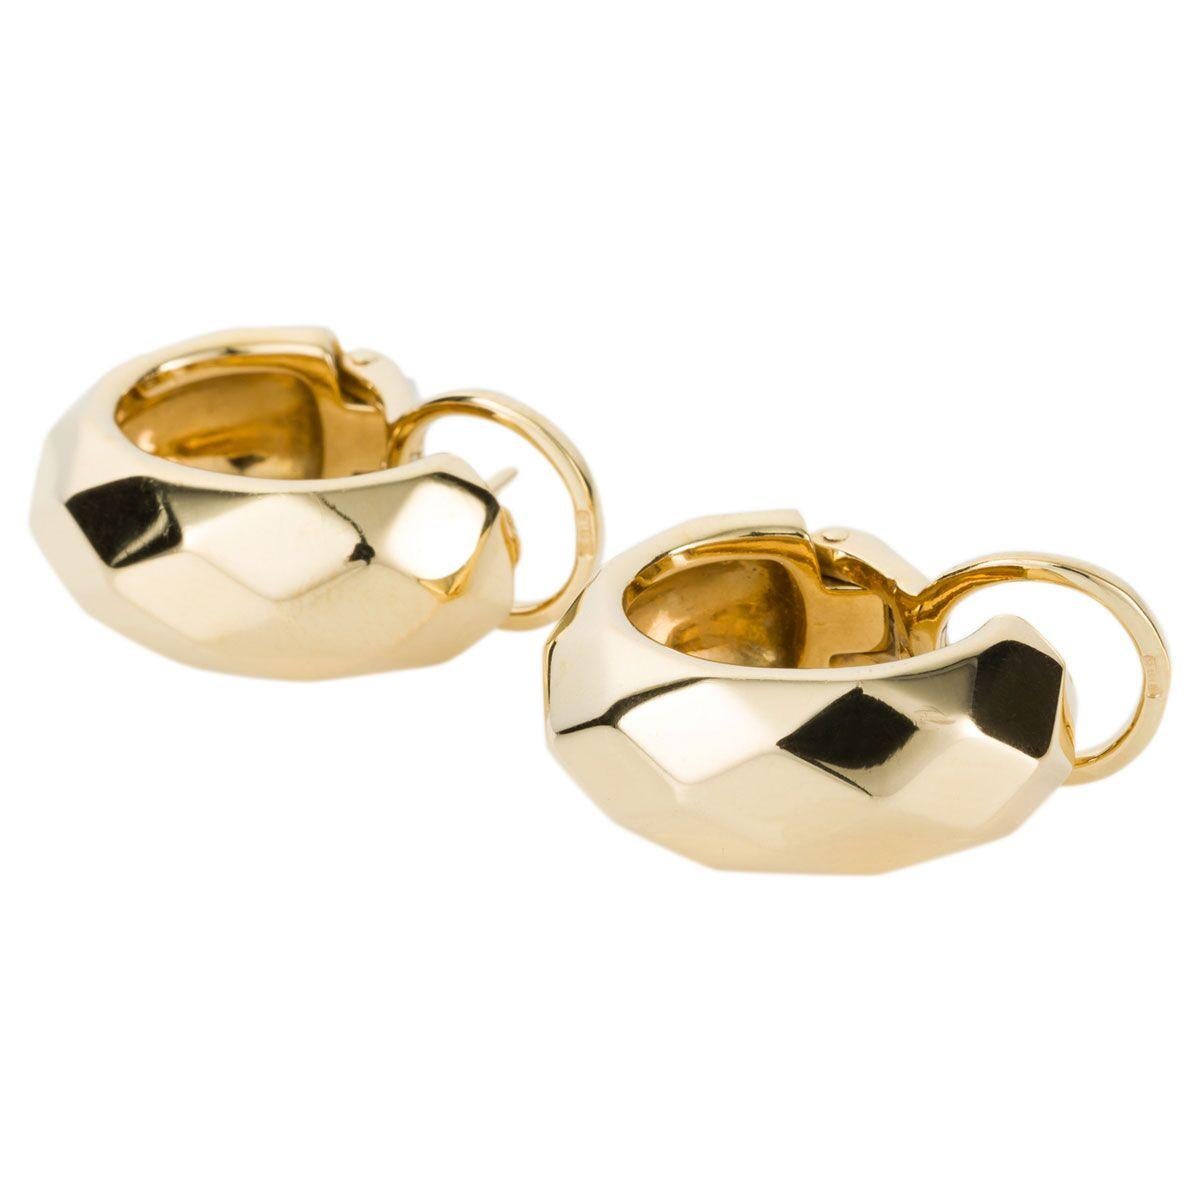 How fashionable are these earrings and so wearable for all occasions, beautifully crafted which is typical of the Italian designer Pomellato. High polish wide gold hoops that have a gentle diamond shaped faceting which throws off light in different